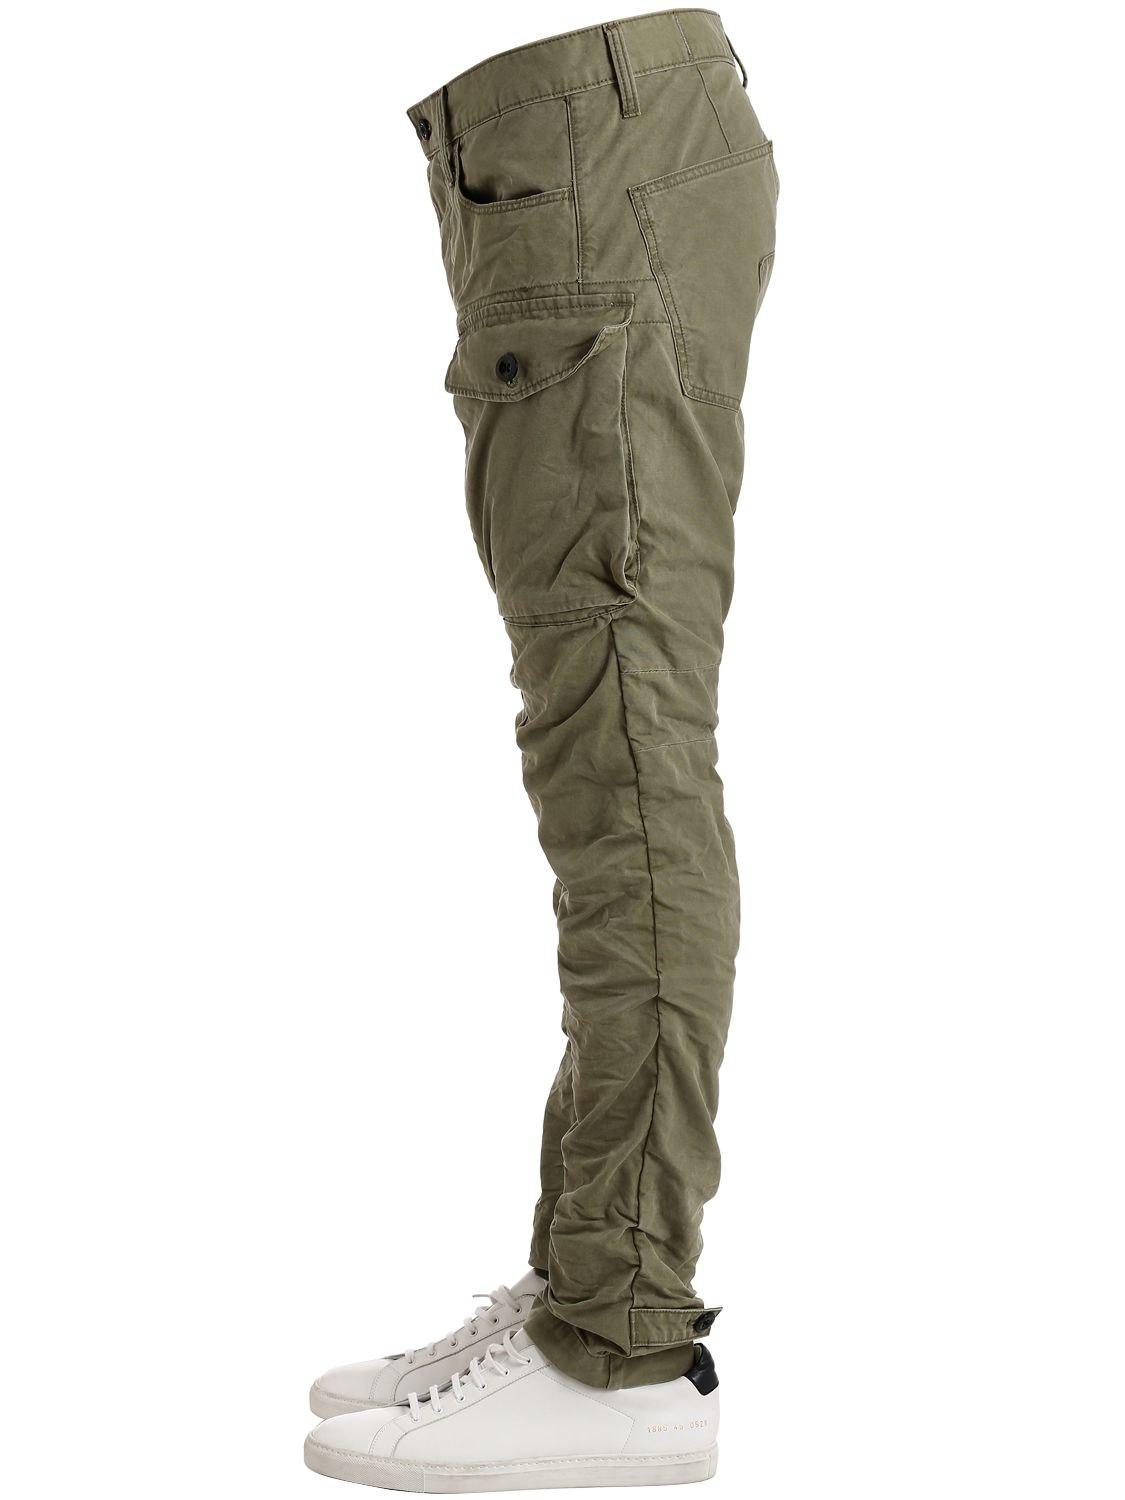 G-Star RAW Tendric 3d Tapered Cotton Cargo Pants in Green for Men - Lyst